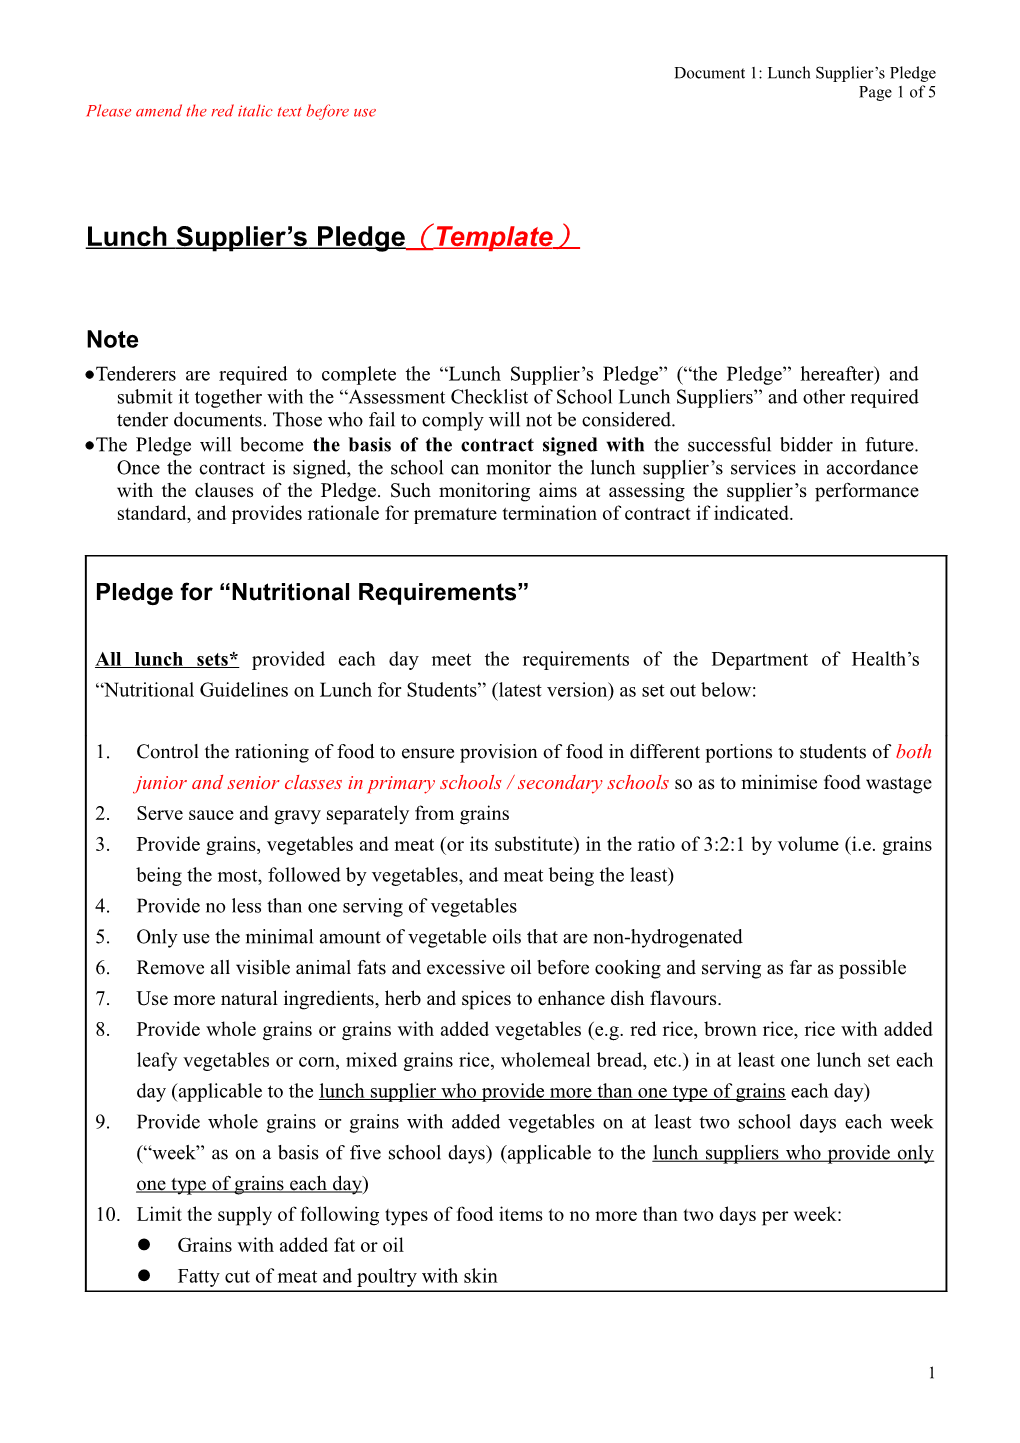 Lunch Supplier's Pledge (Template)